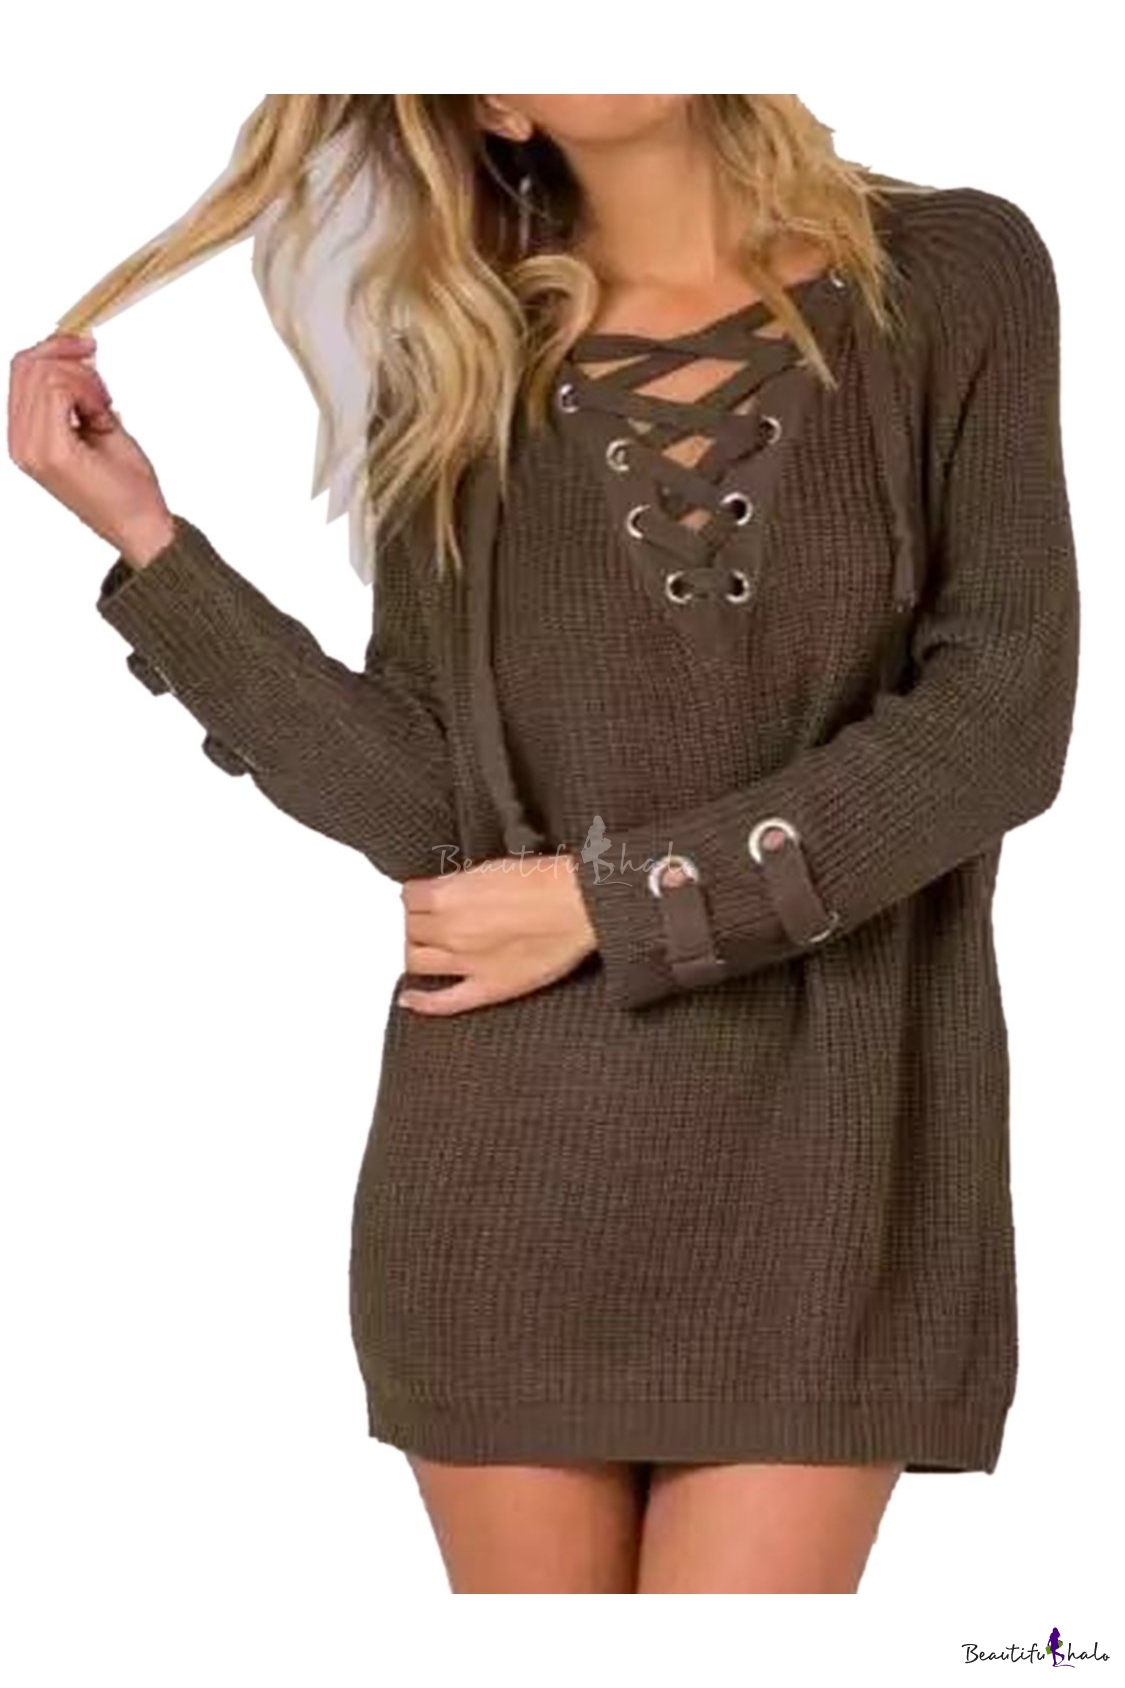 HDGTSA Women's Sweater Dress Tight Long Sleeve Solid Color Fall Pullover Top 